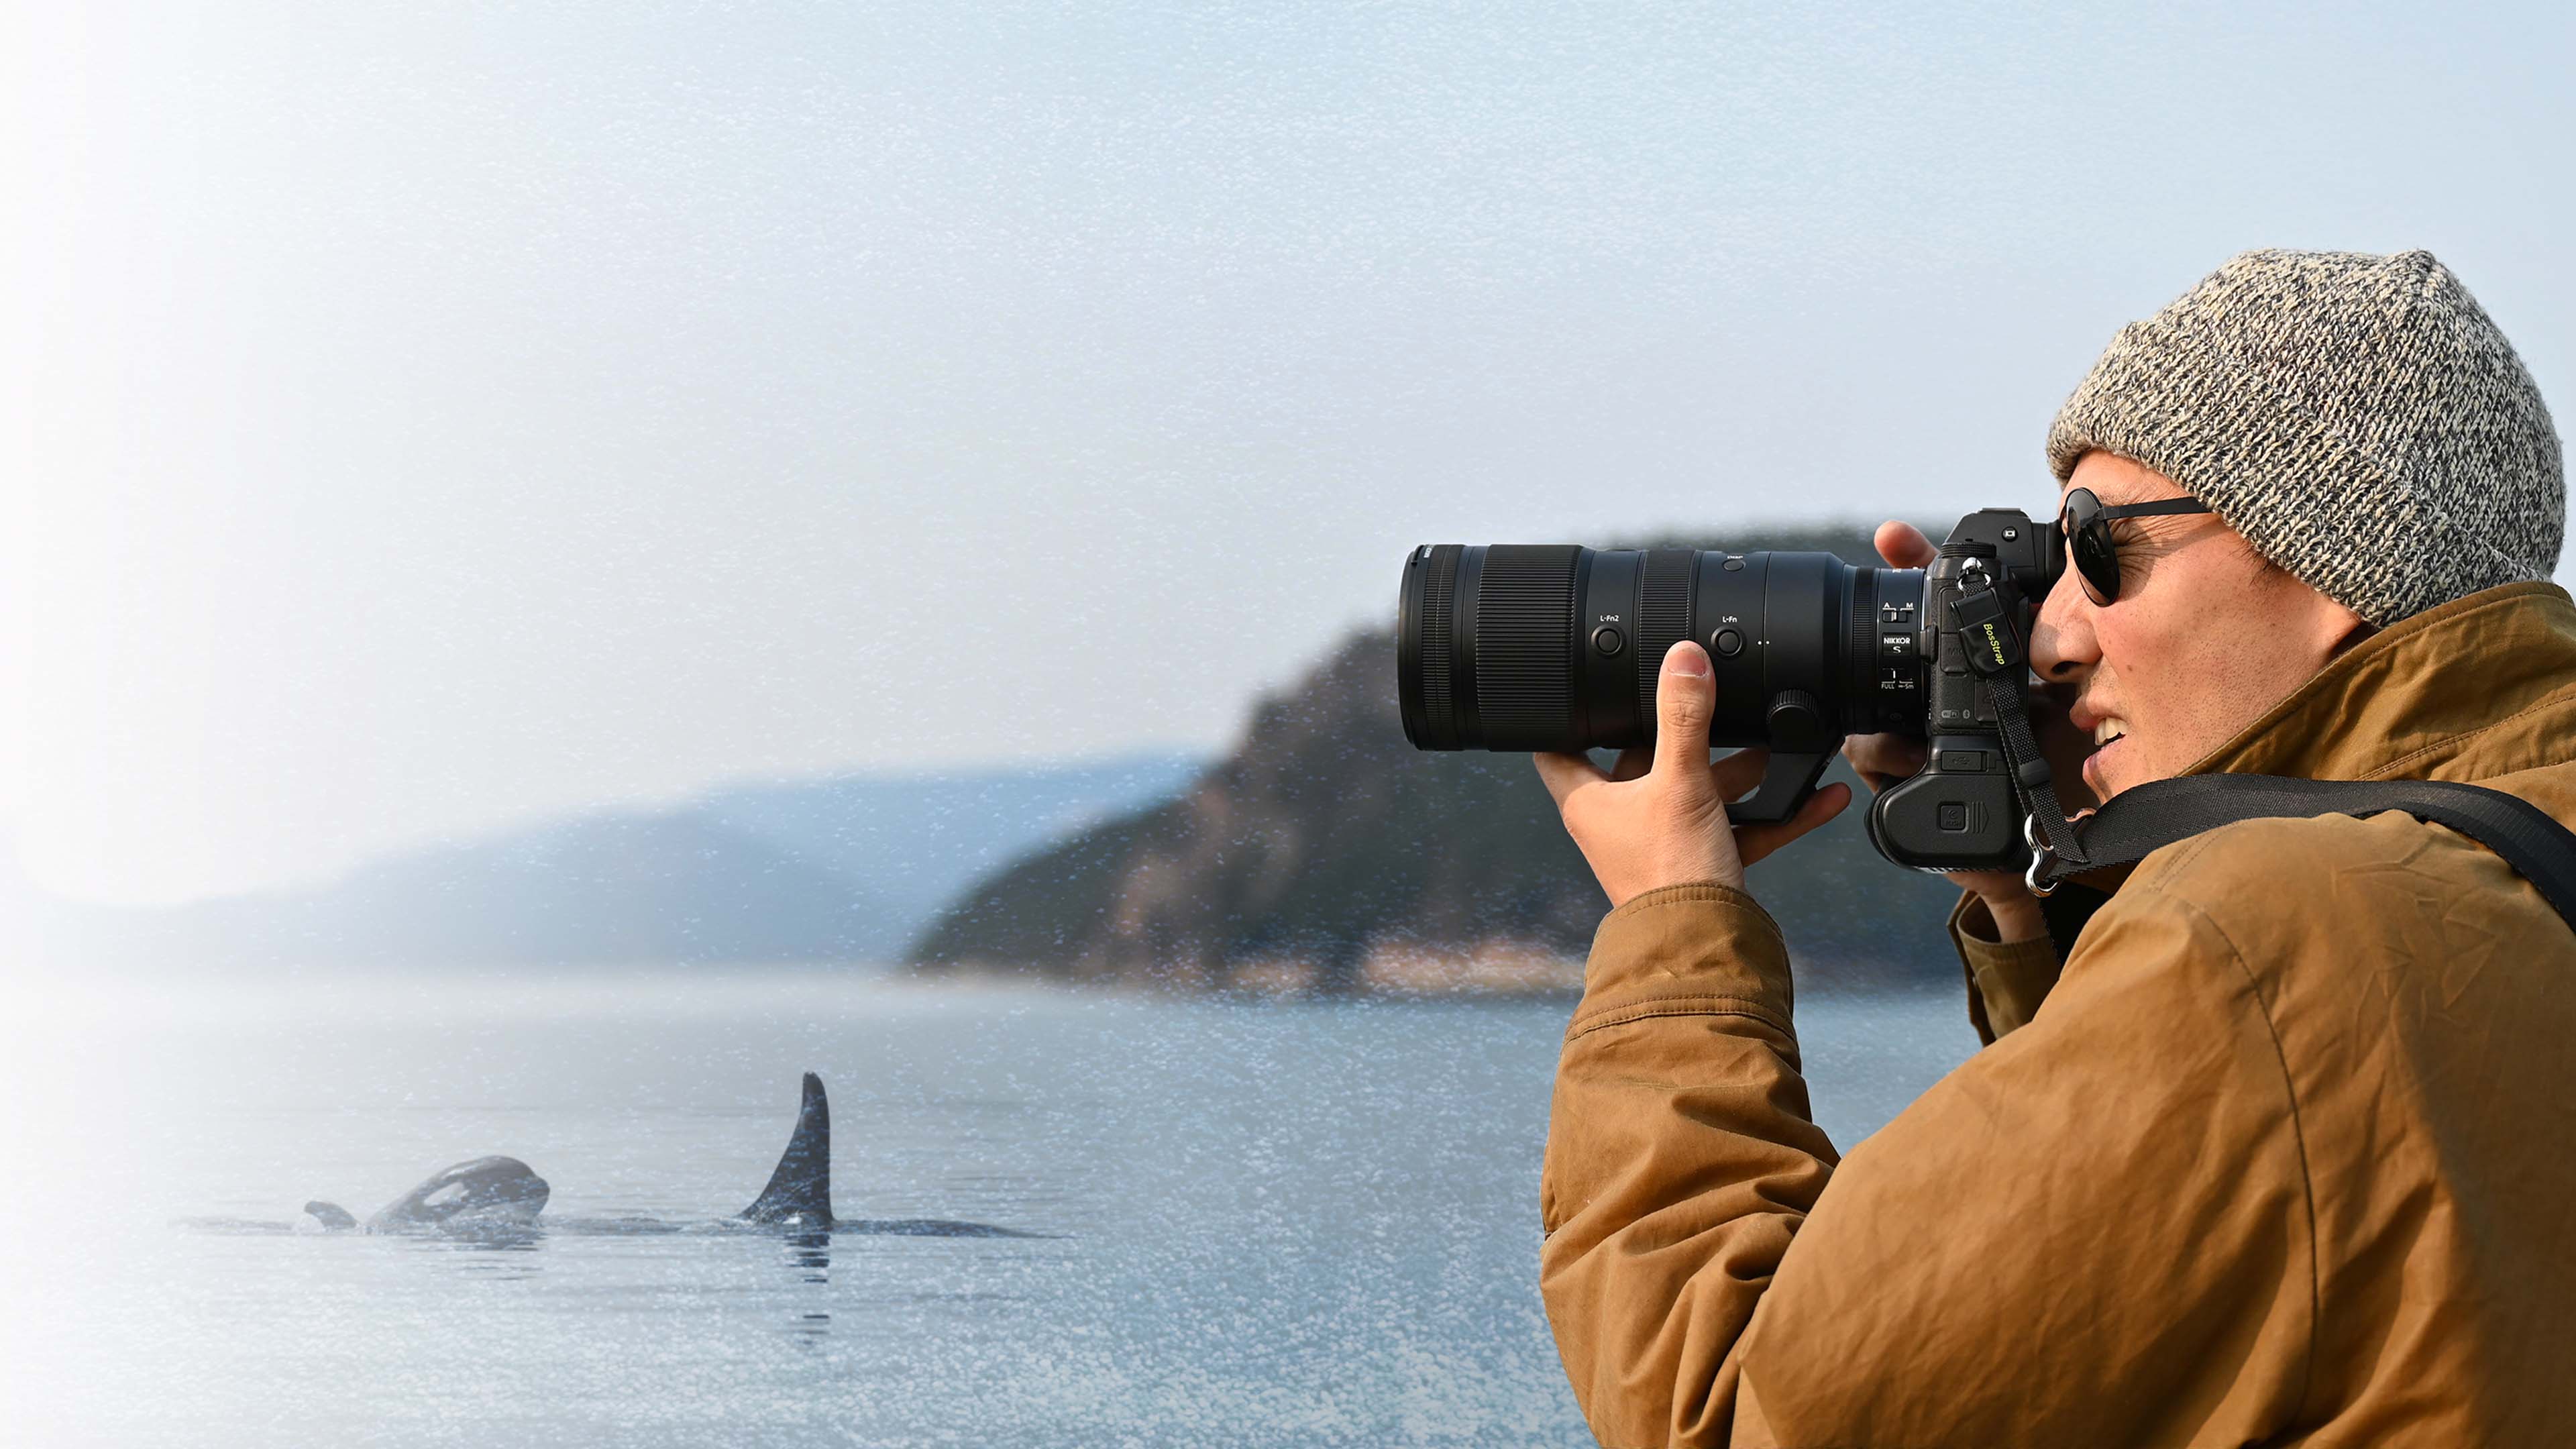 A man in a woolen hat and jacket holds a camera with a long lens and looks through it. A pair of killer whales emerge from the ocean in the background.